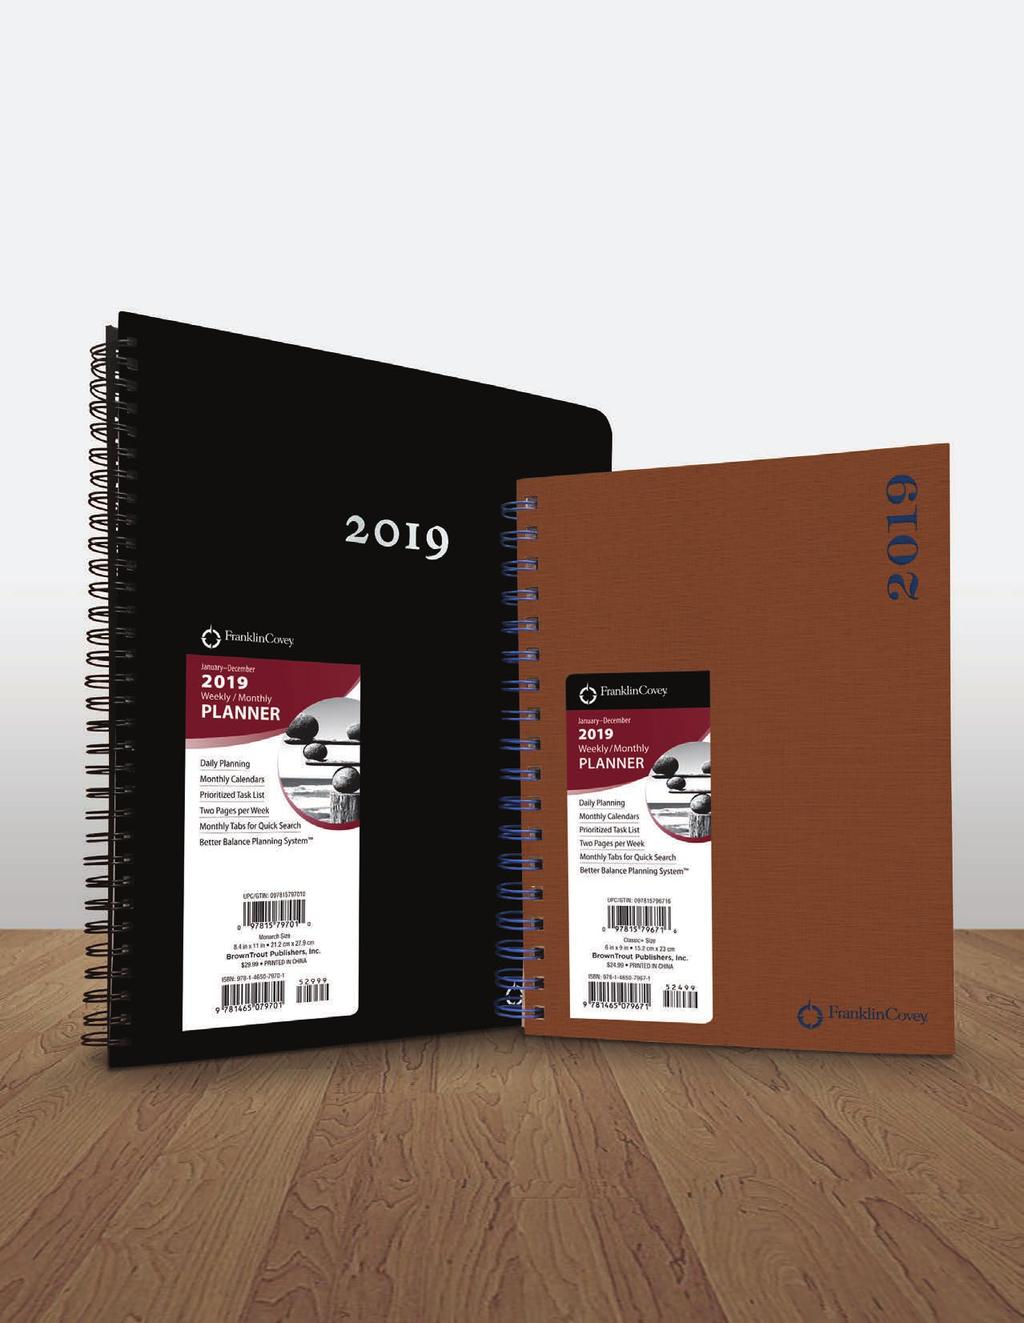 09 FranklinCovey Planners Rebooted and Ready for Retail! Summer 08 BrownTrout Publishers, Inc.